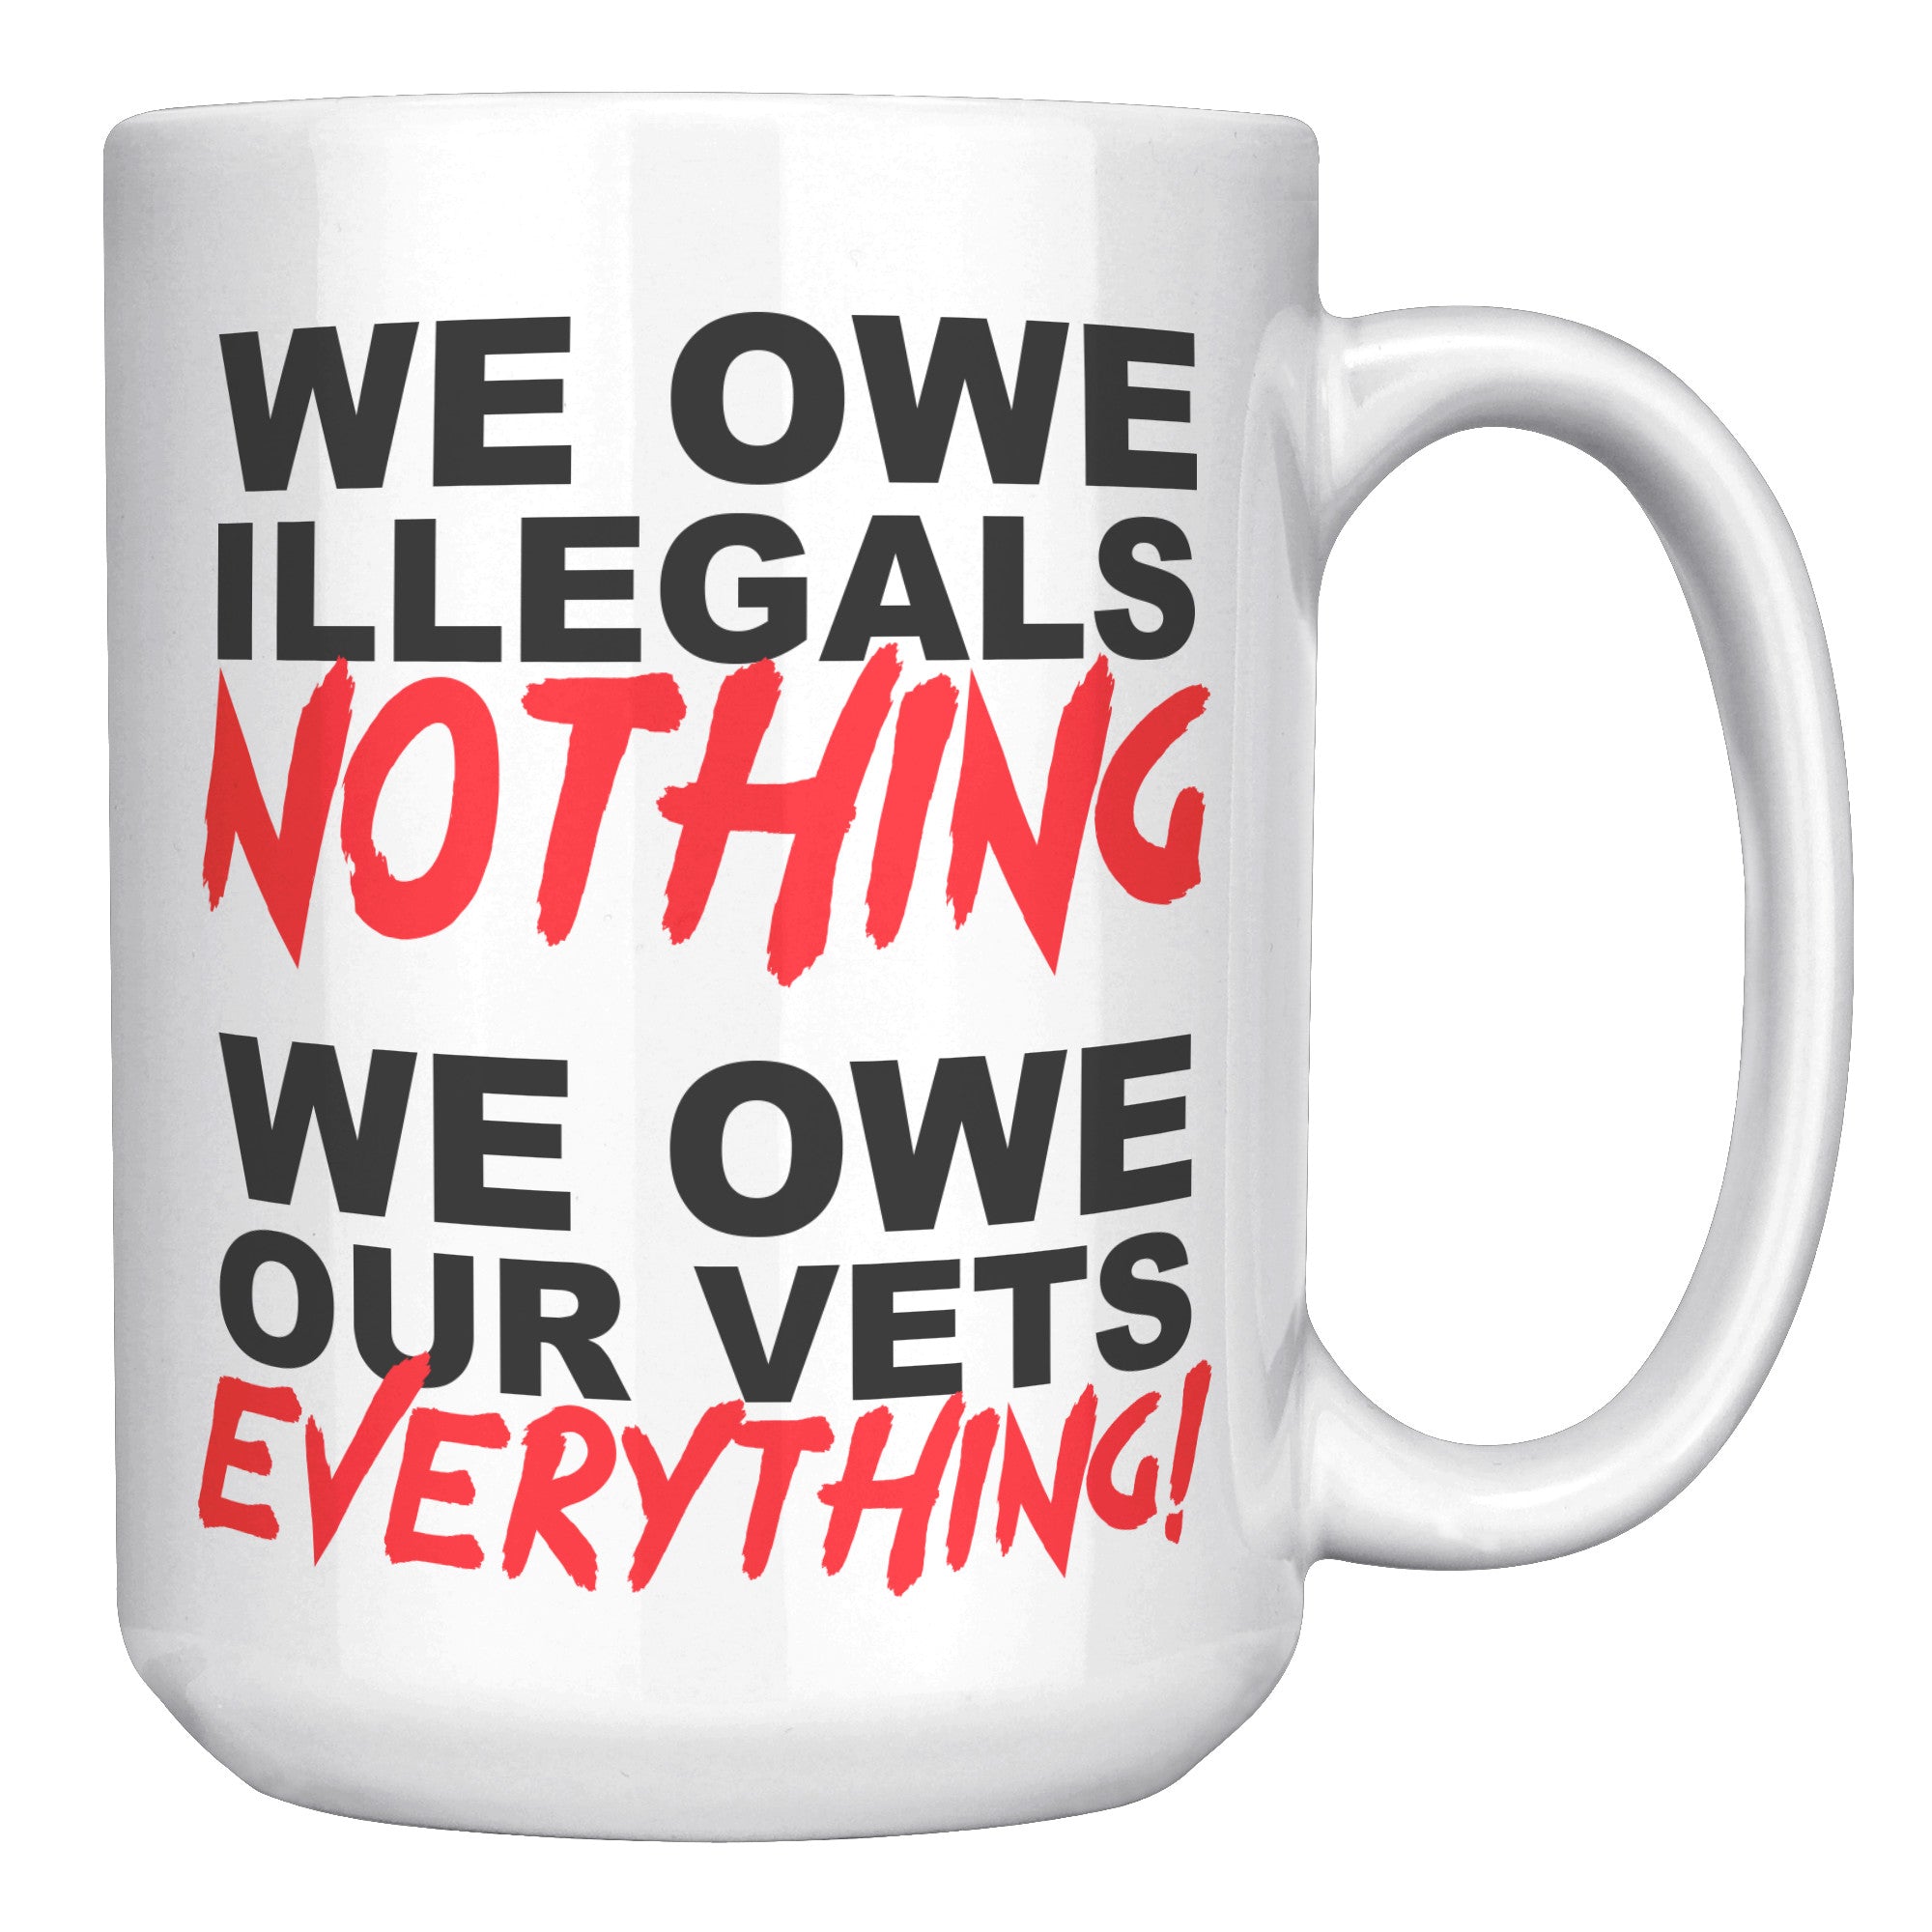 We Owe Illegals Nothing We Owe Our Vets Everything Coffee Mug -Front/Back | Drunk America 